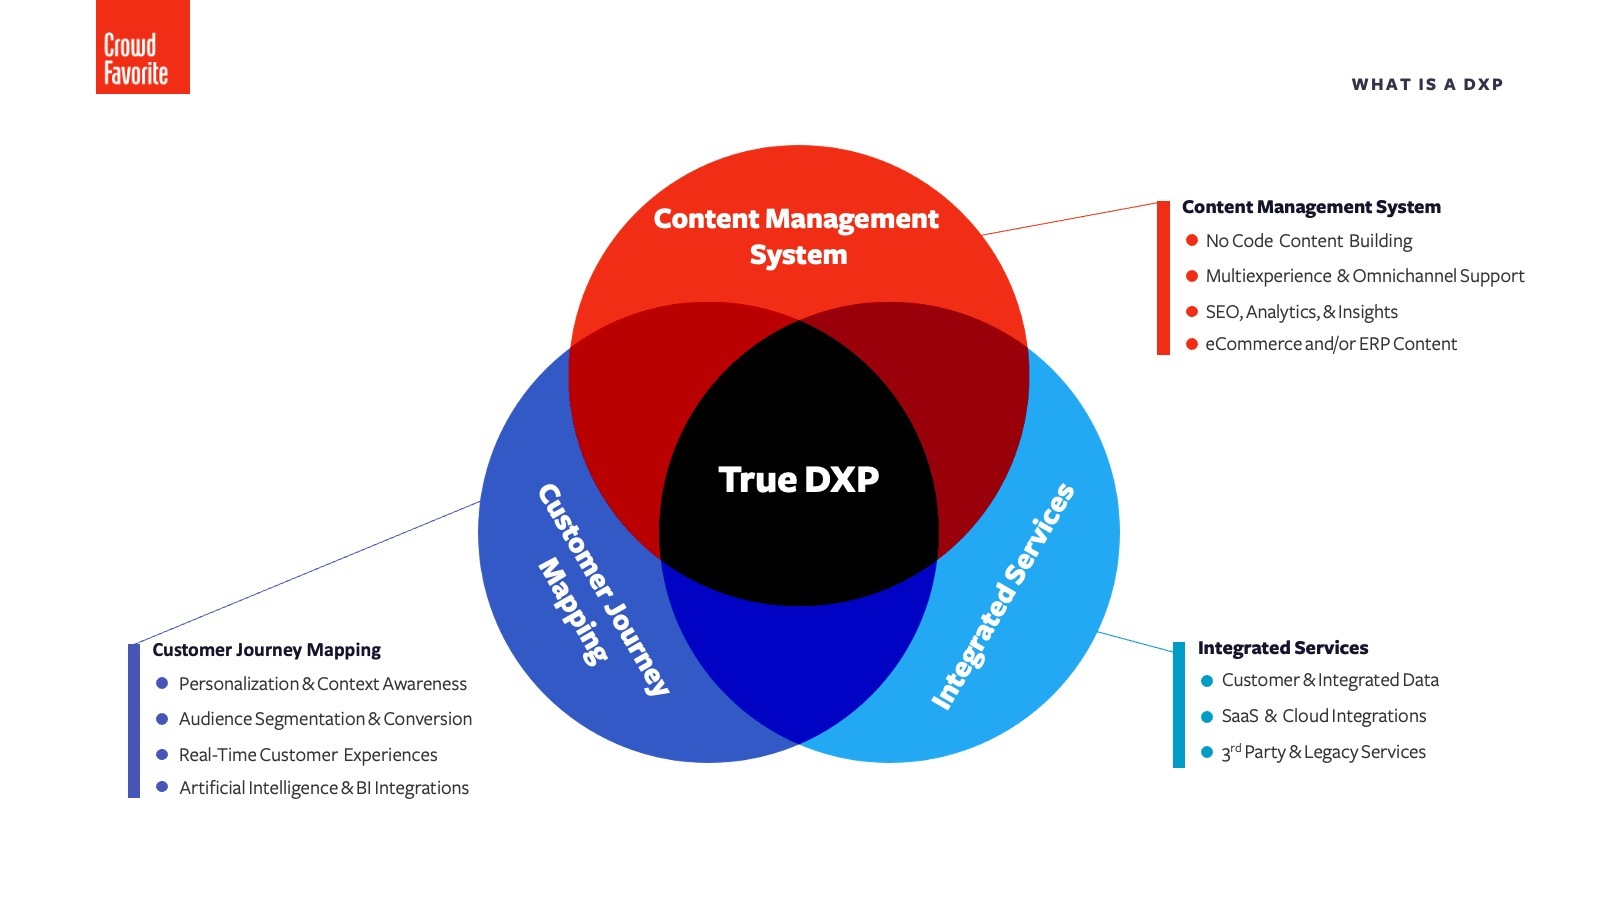 What is a DXP?